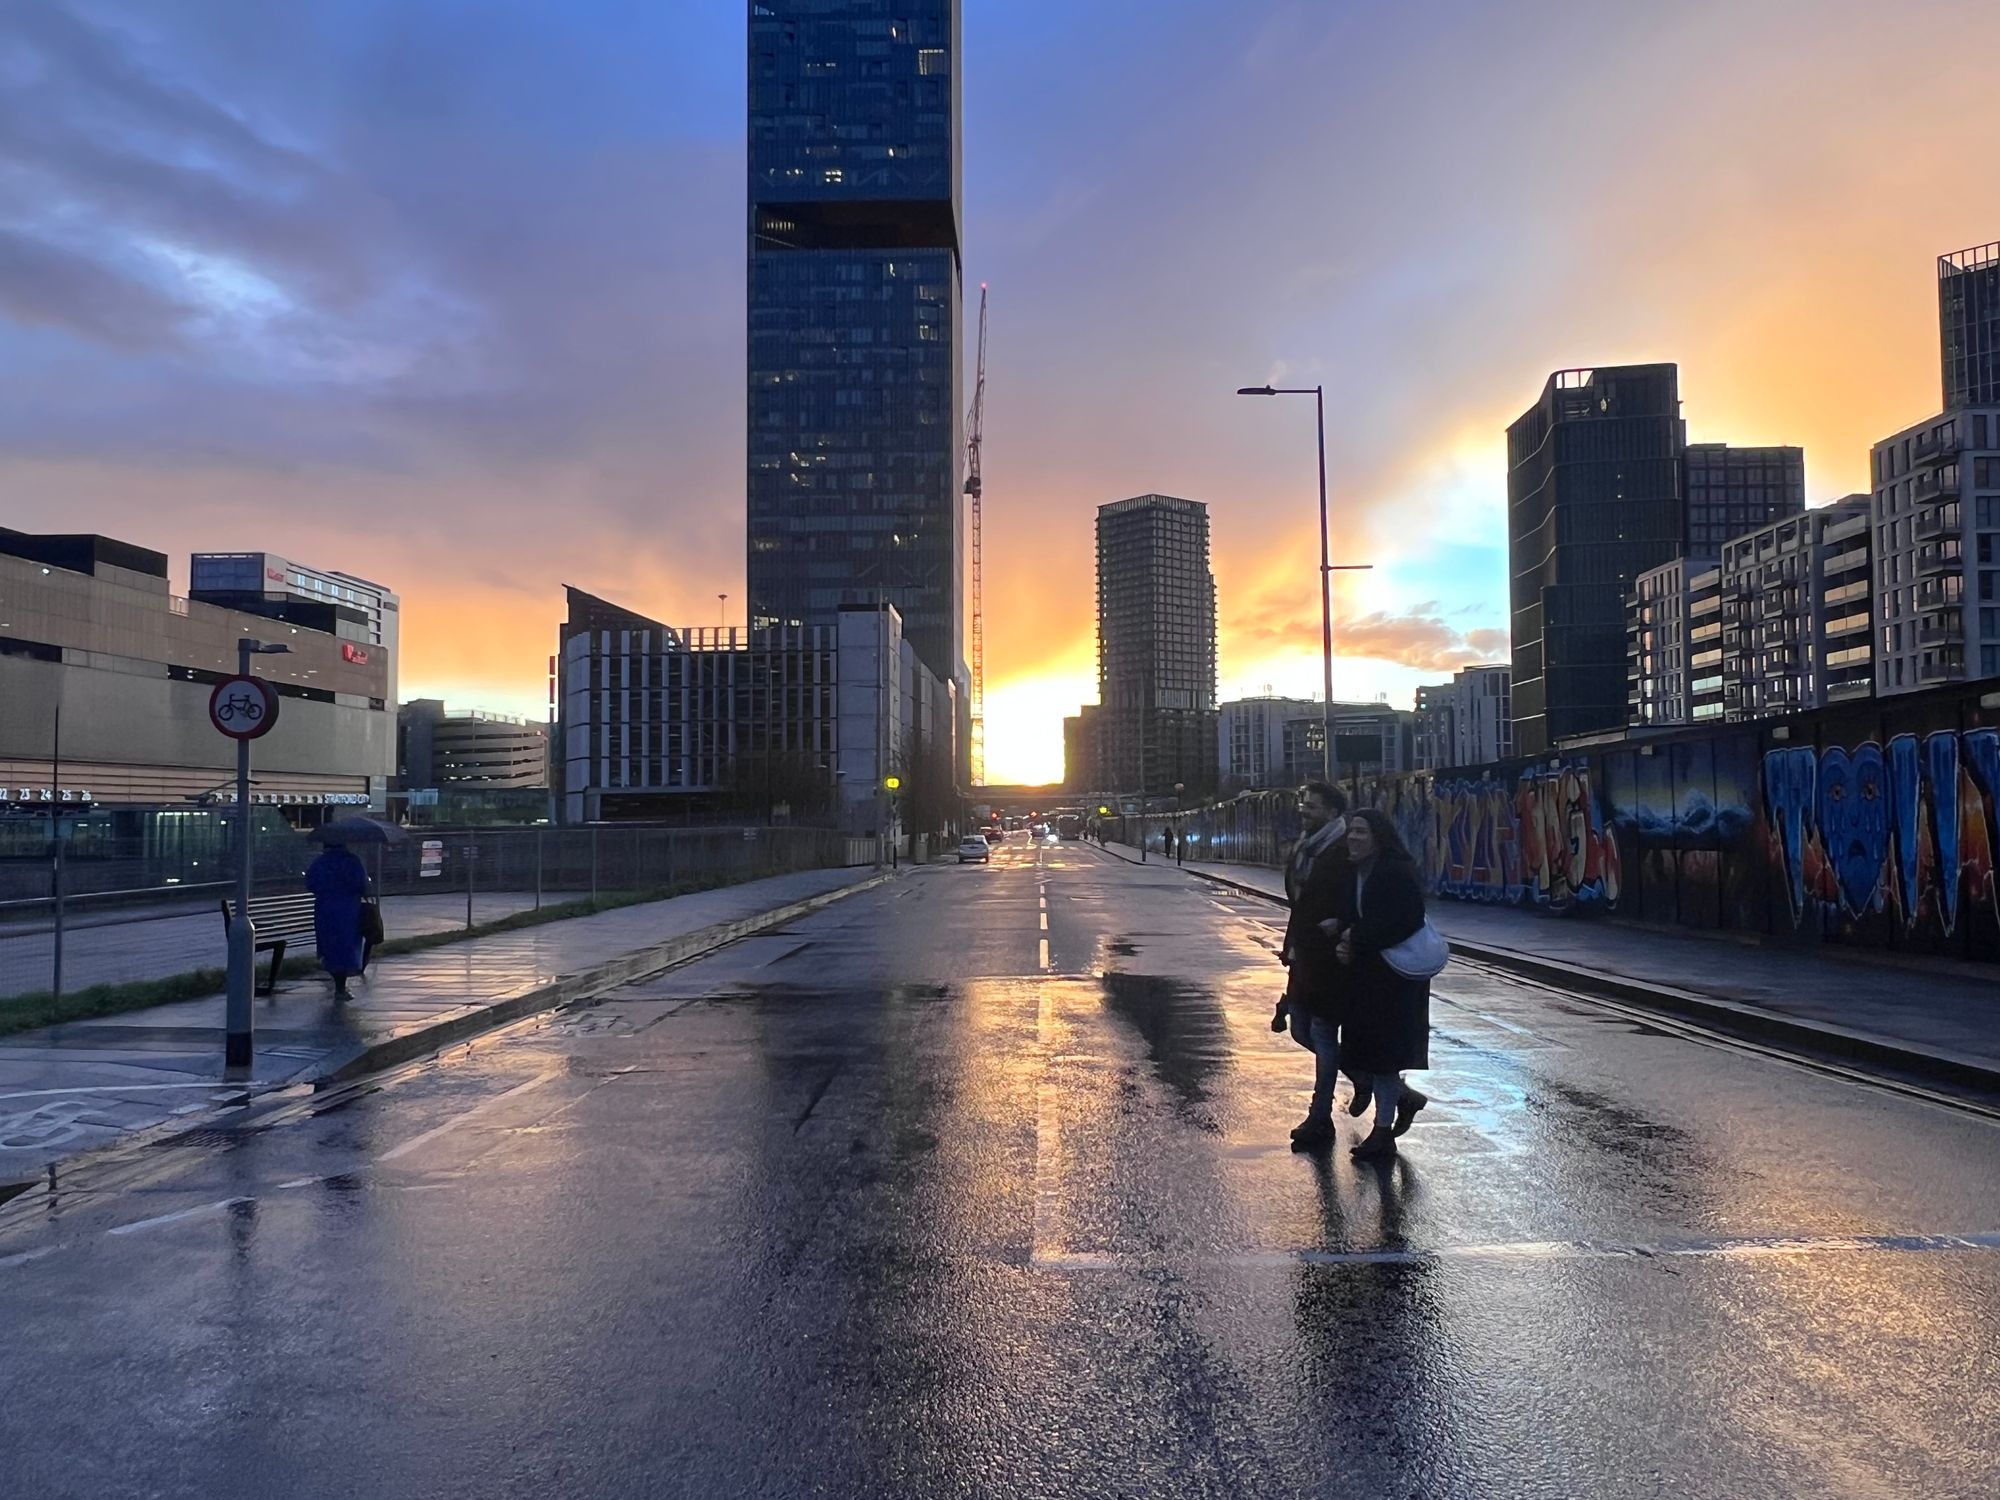 People cross a wide street with tall buildings in the distance, the tarmac wet and reflecting a glorious cloudy sunset.